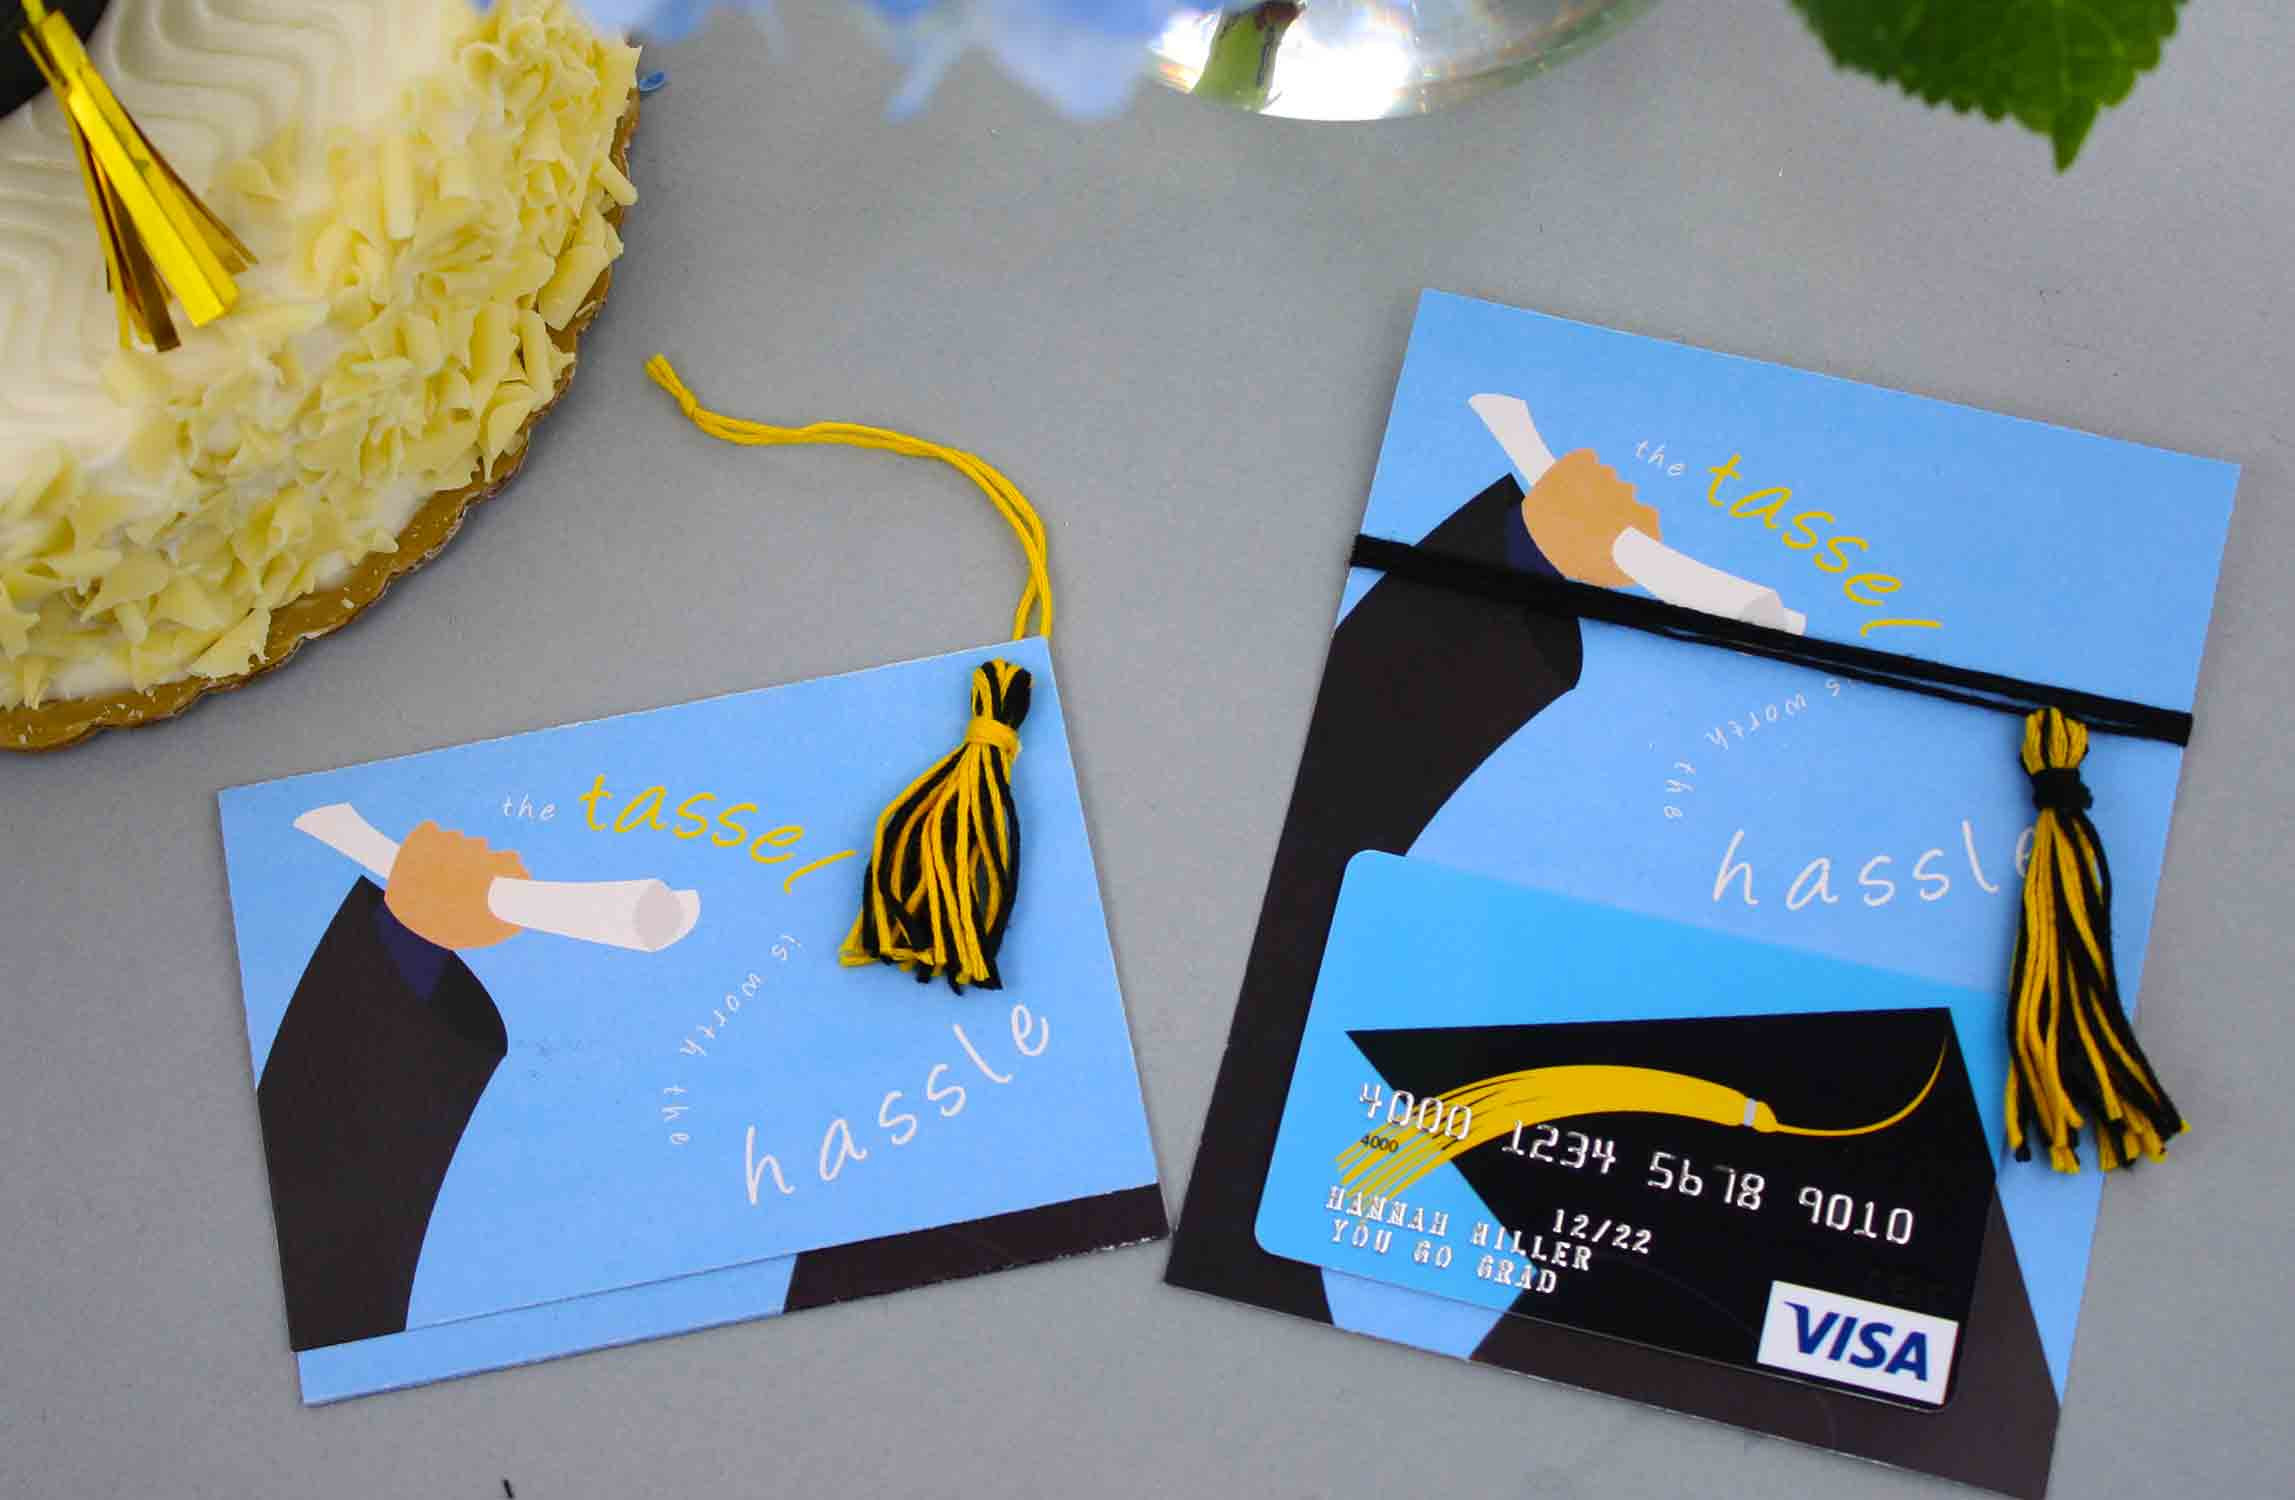 The Best Ideas for Graduation Gift Card Ideas Home, Family, Style and